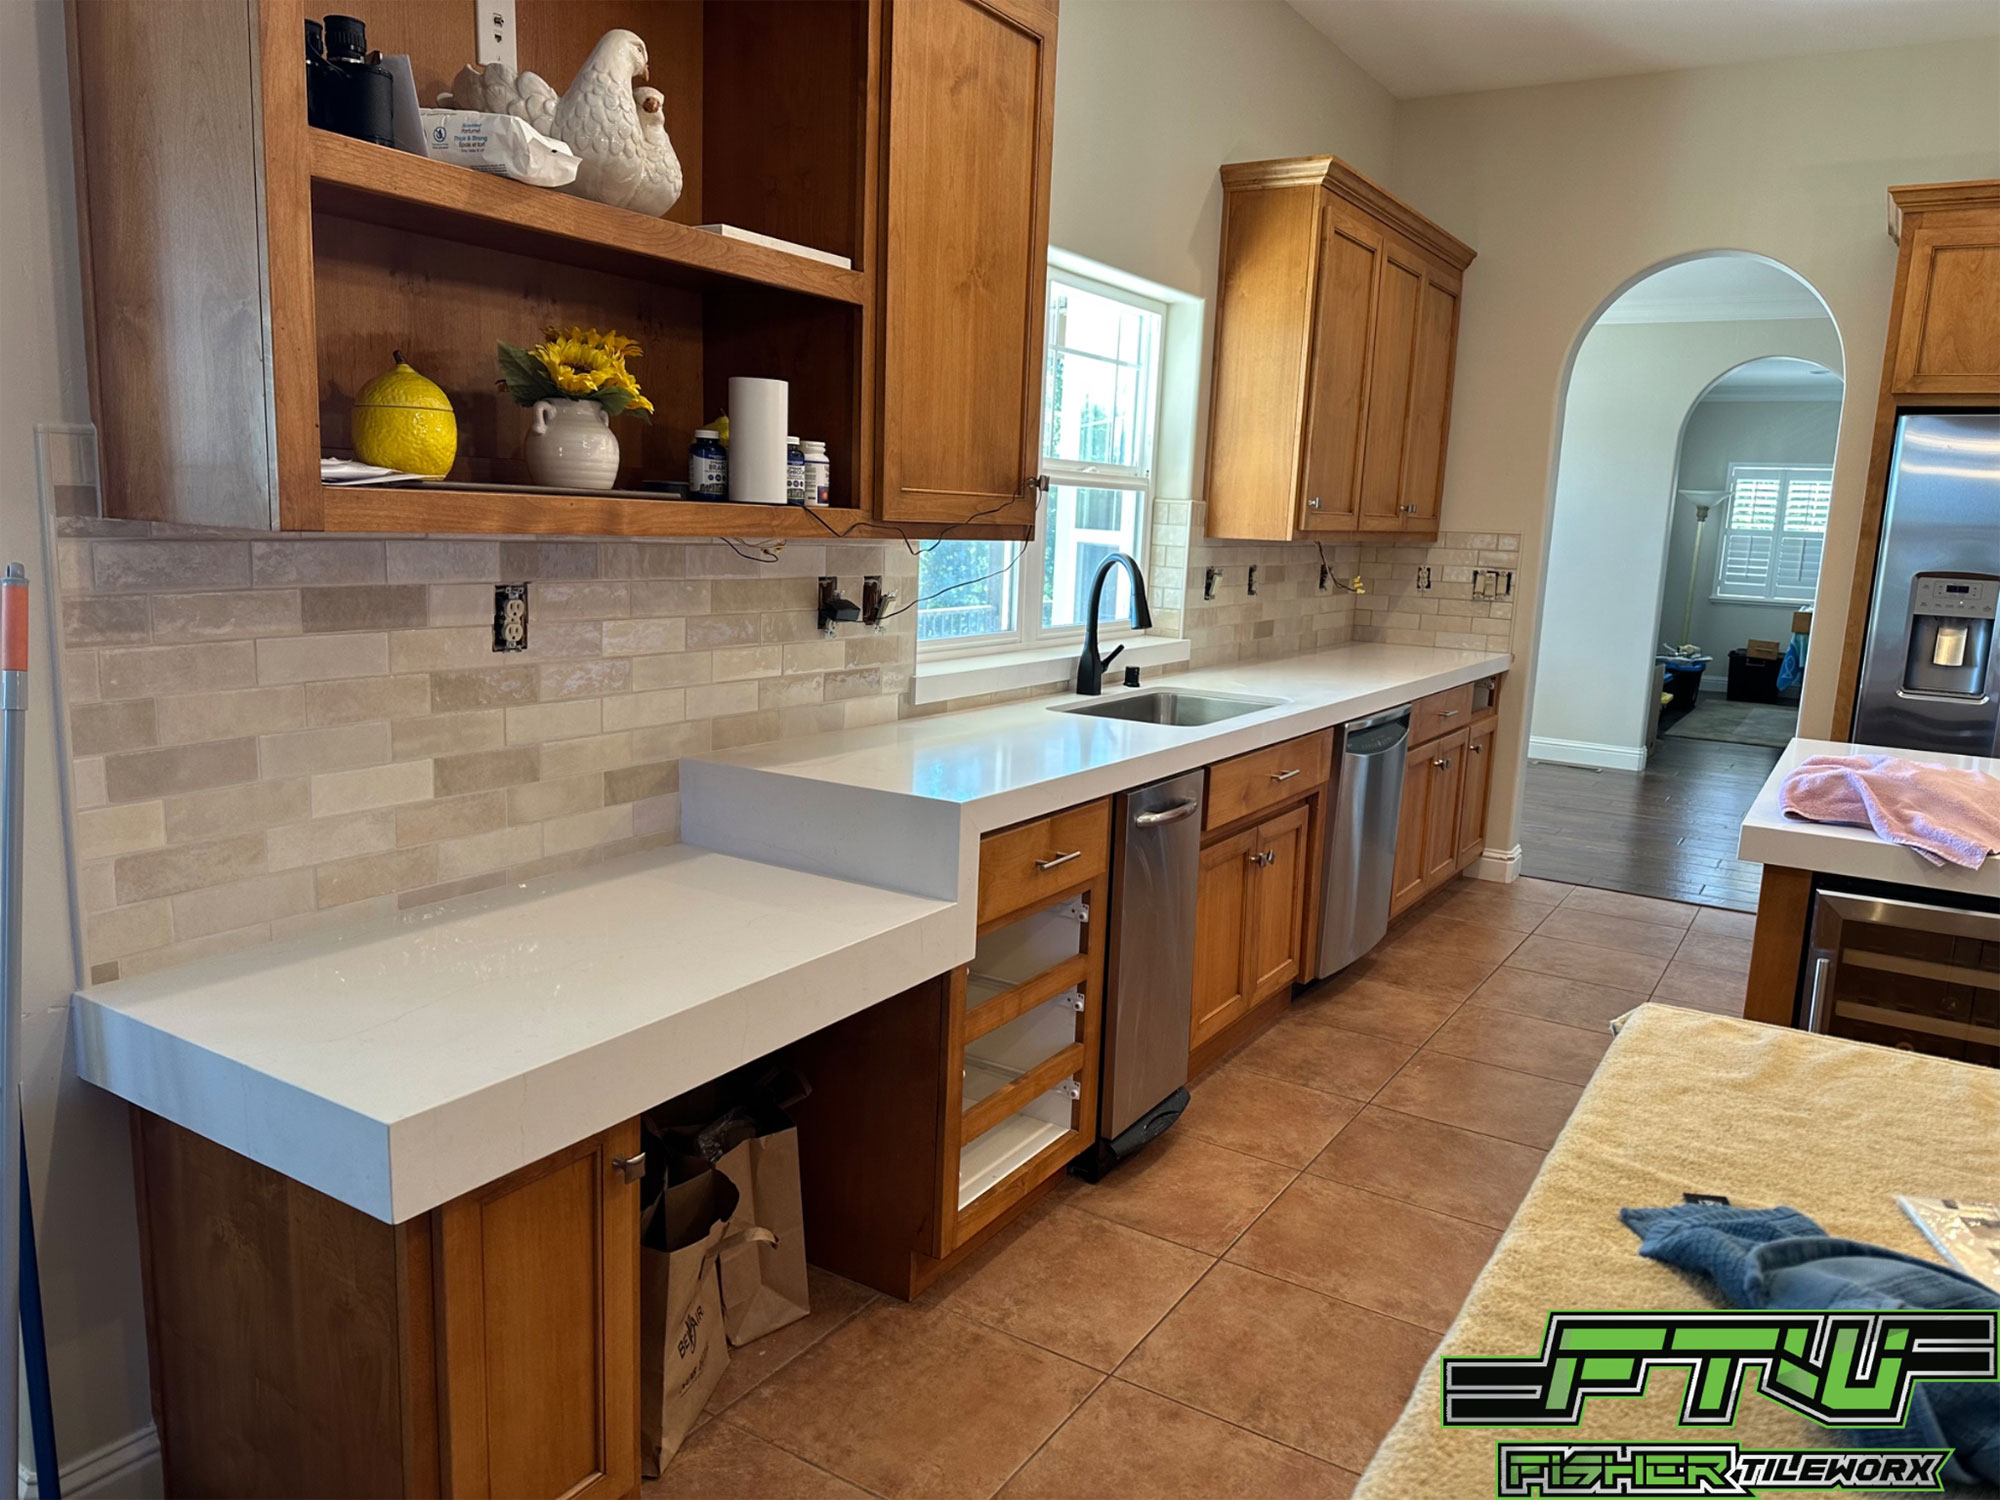 Kitchen Remodels in Placer County Tips and Tricks - Fisher Tileworx